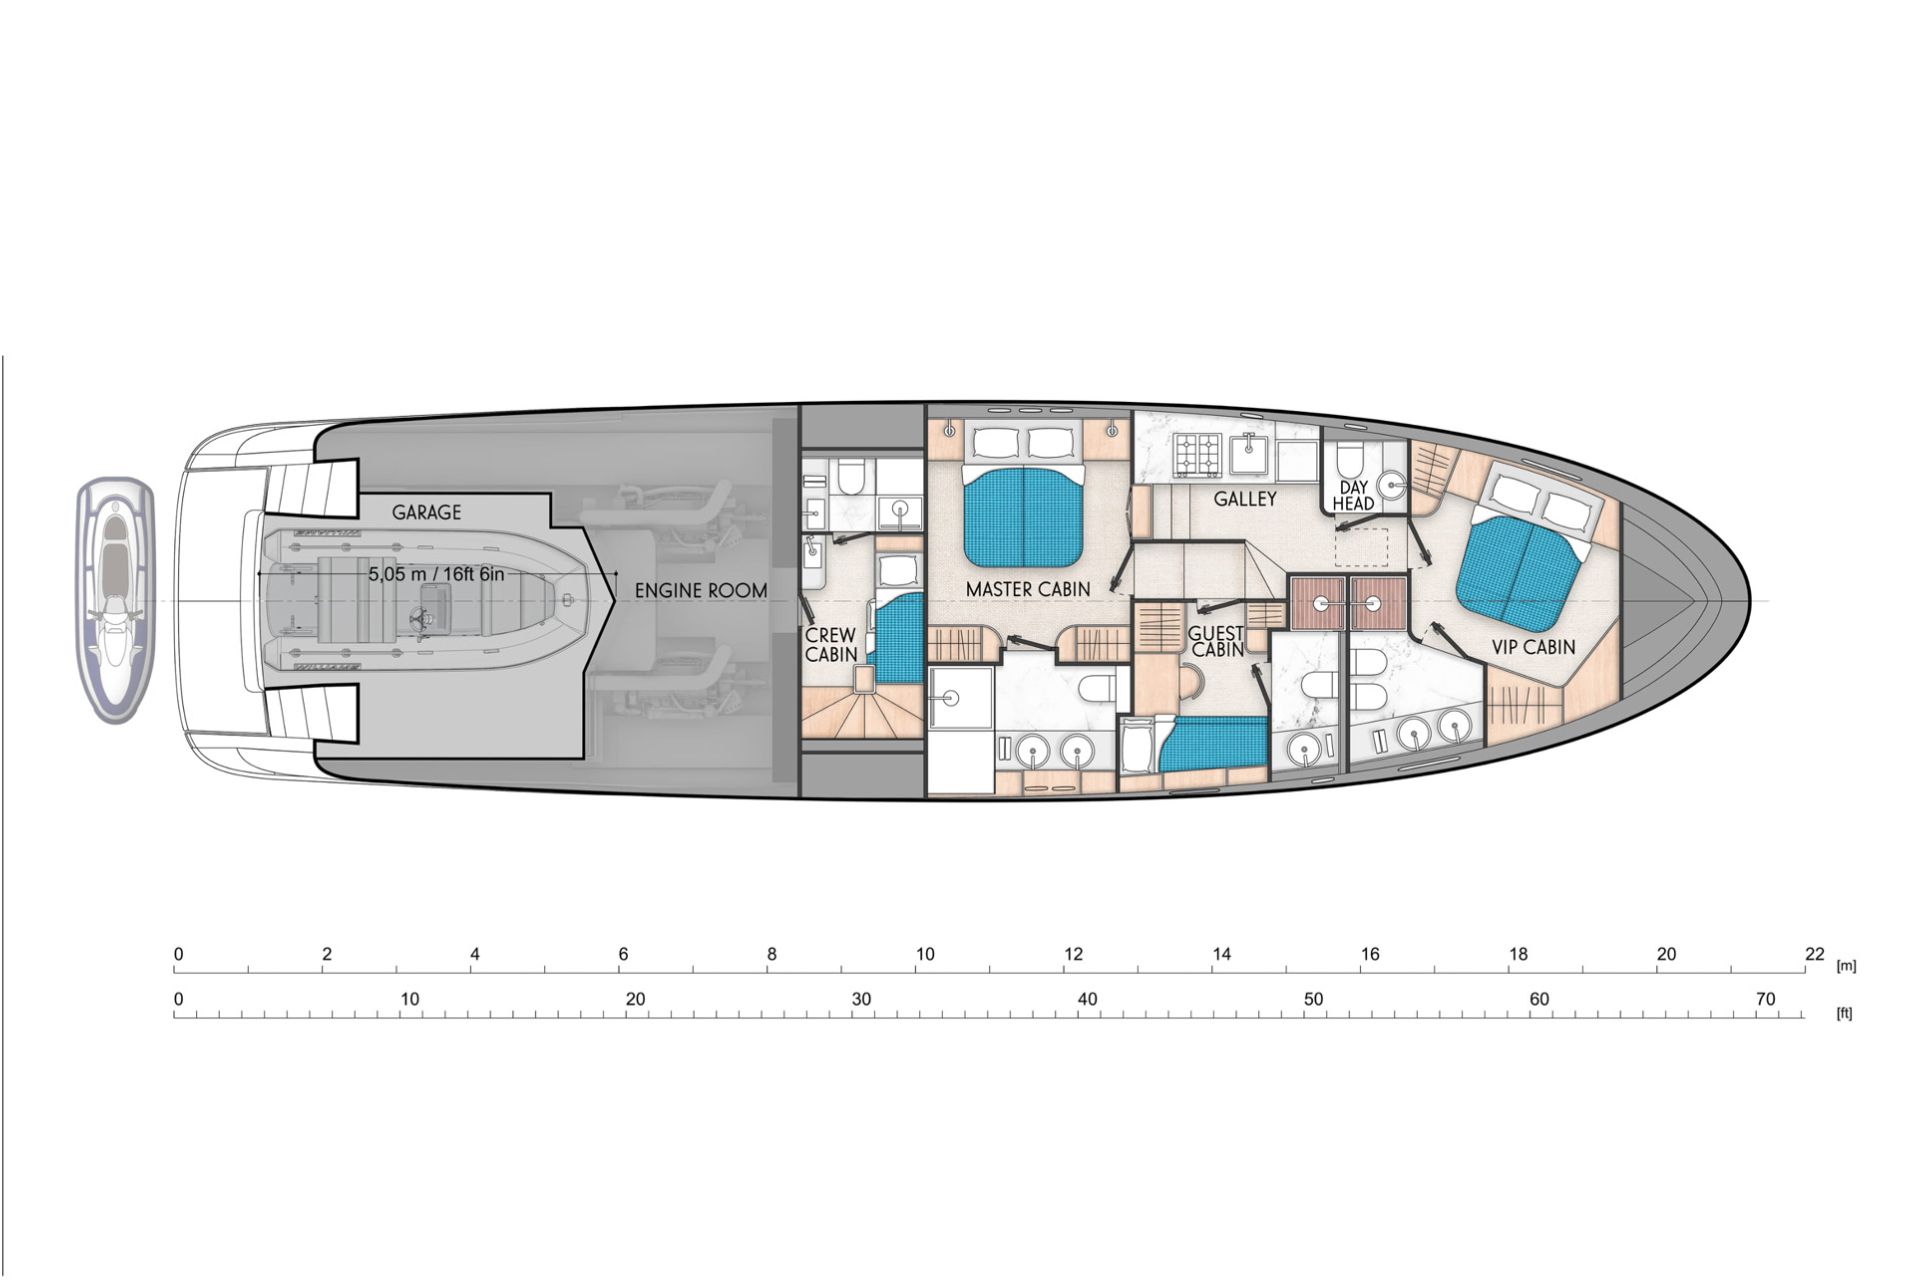 Lower deck type A No.3 similar solution like Lowerdeck2 but with CrewCabin/2nd guest cabin for two persons.